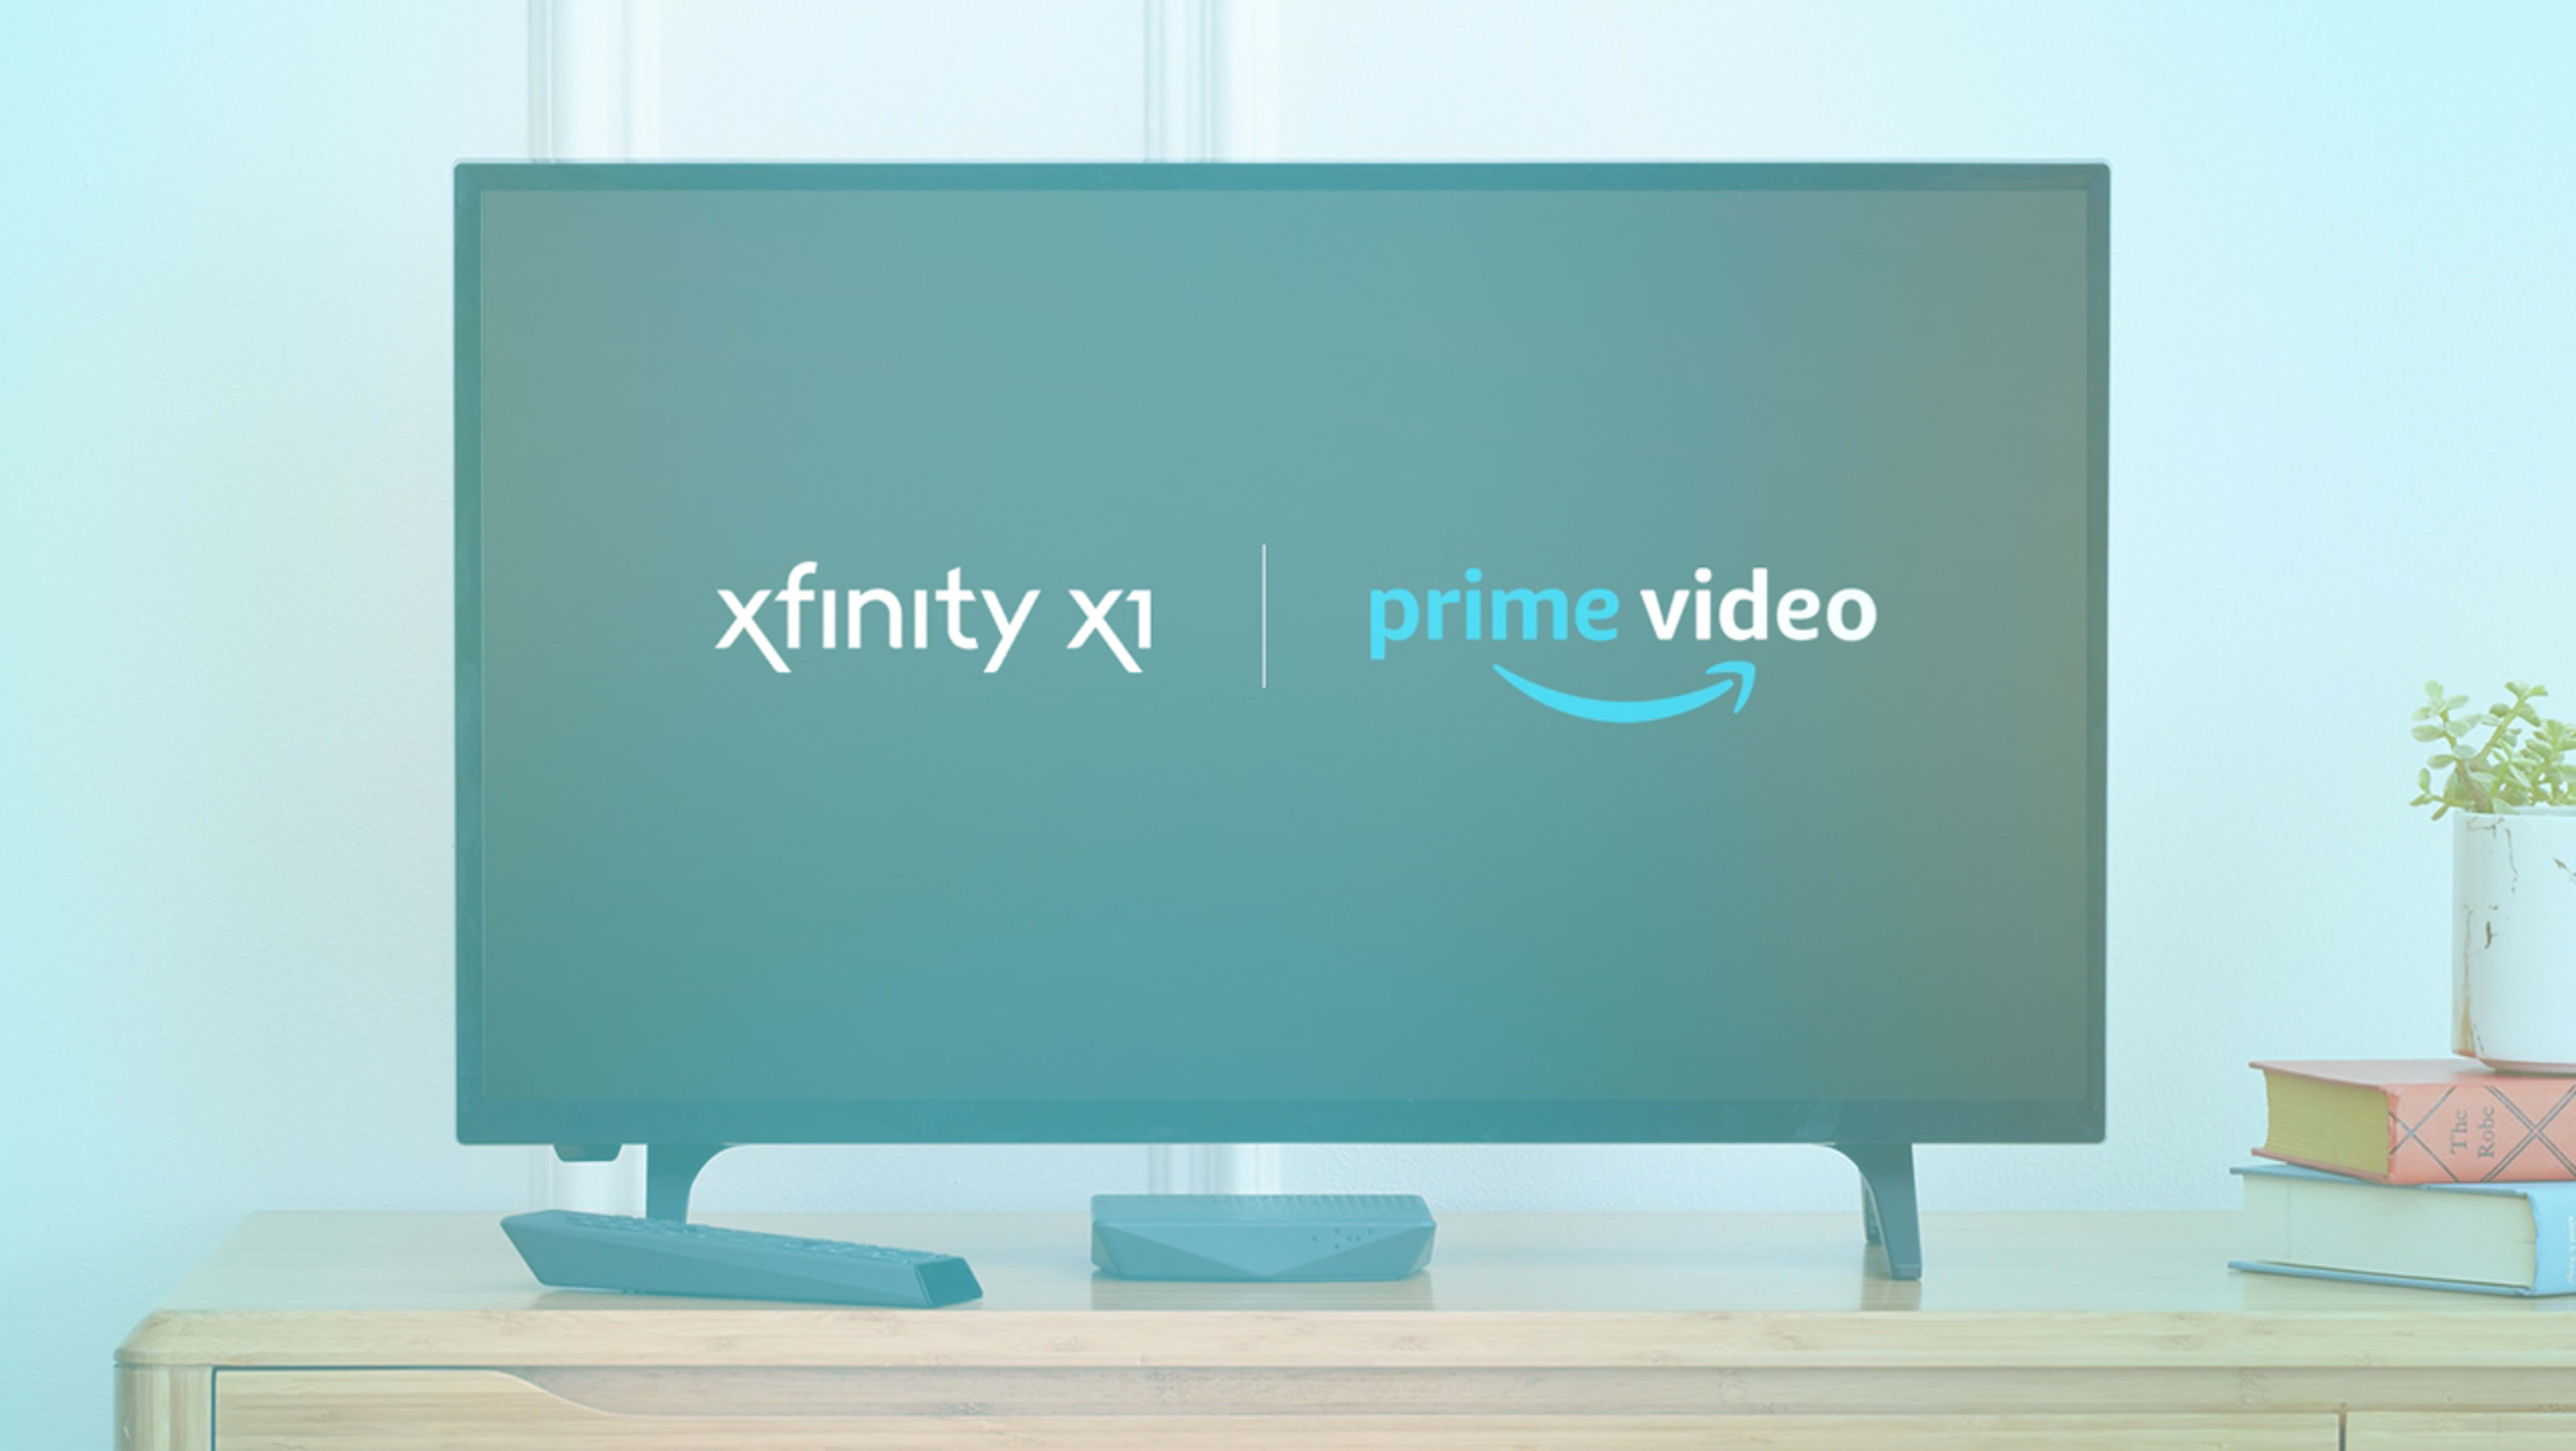 Comcast is putting Amazon Prime Video on its cable boxes